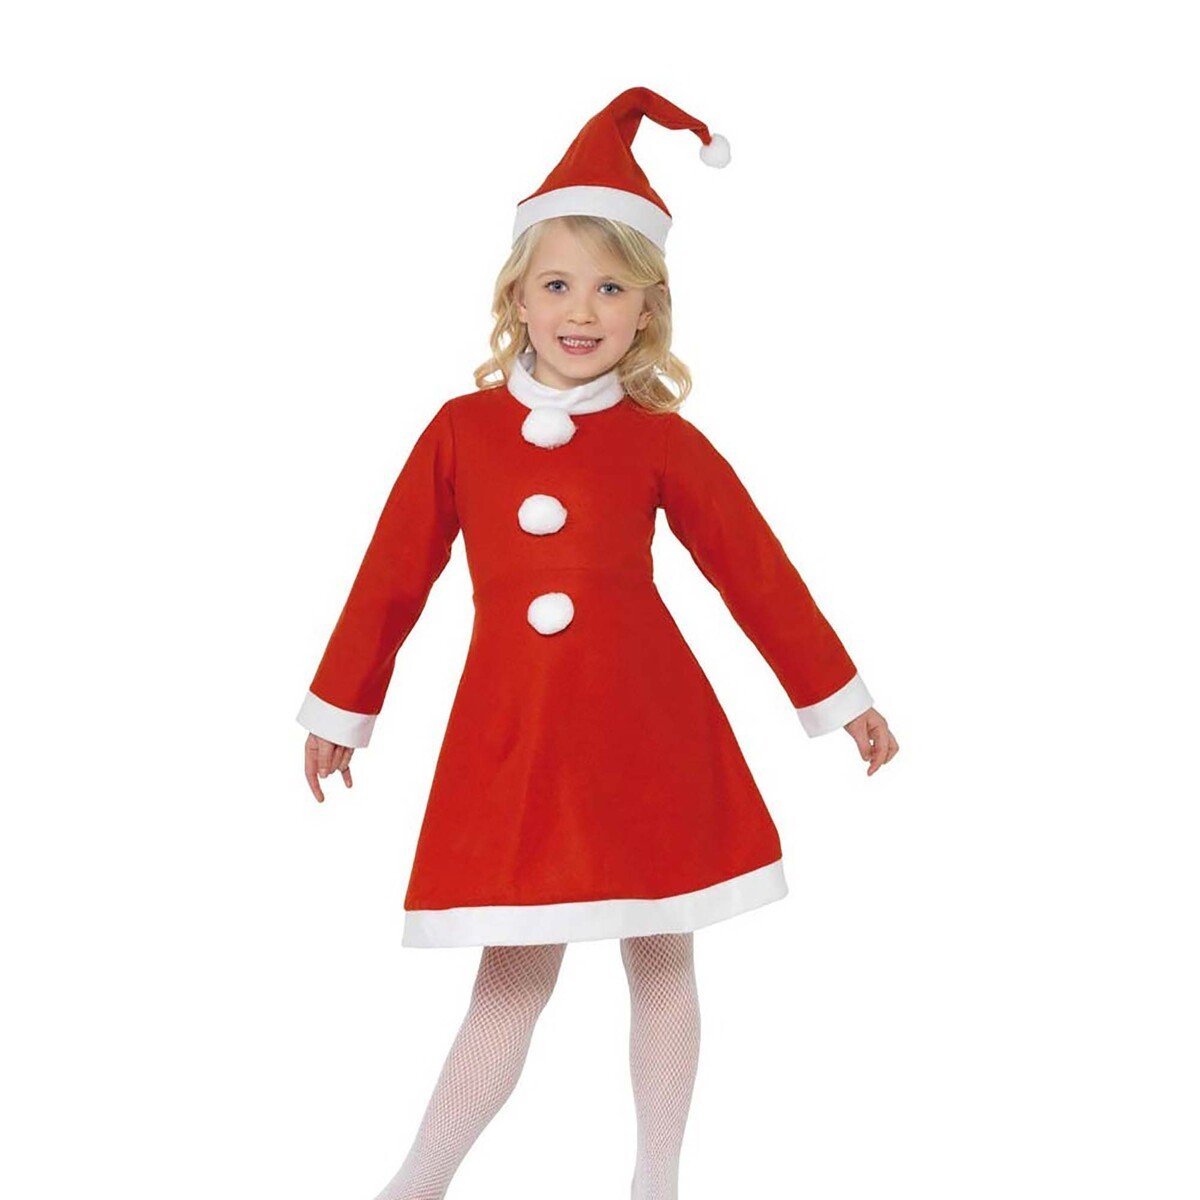 Party Fusion X'mas Girls Santa Costume 4-6 Year Old Kids 3s